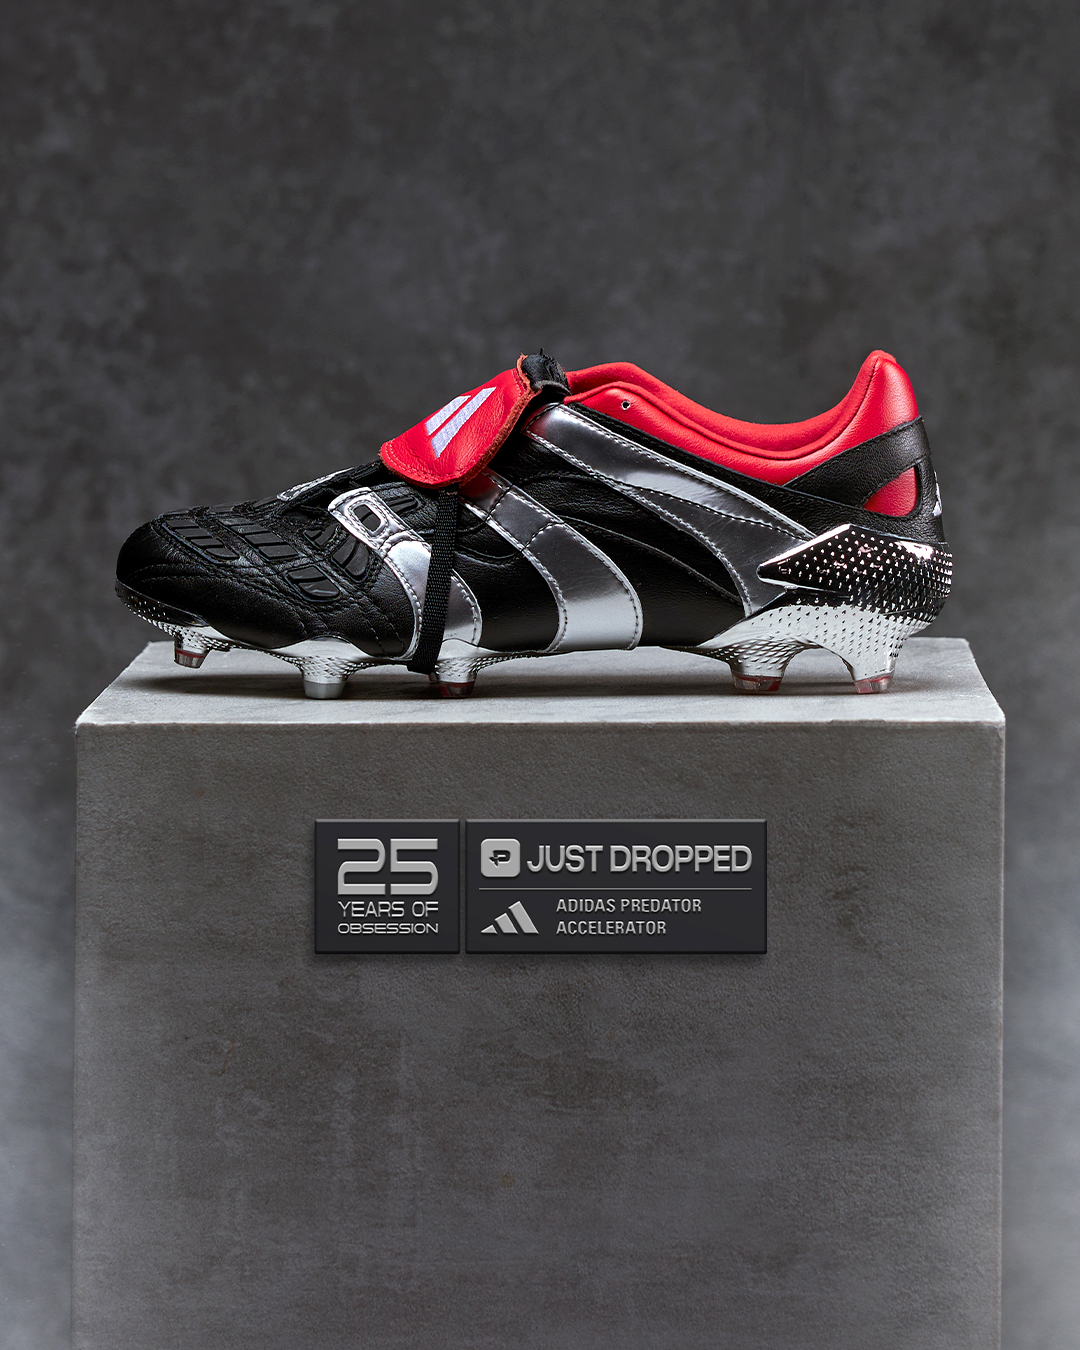 aluminium koper Kapel Pro:Direct Soccer on Twitter: "Shop here 📲 https://t.co/nAdncV9JBl A Pro:Direct  Soccer World Exclusive 🔥 Just 998 pairs of the adidas Predator Accelerator x  Pro:Direct Soccer 25th Anniversary football boots are available NOW